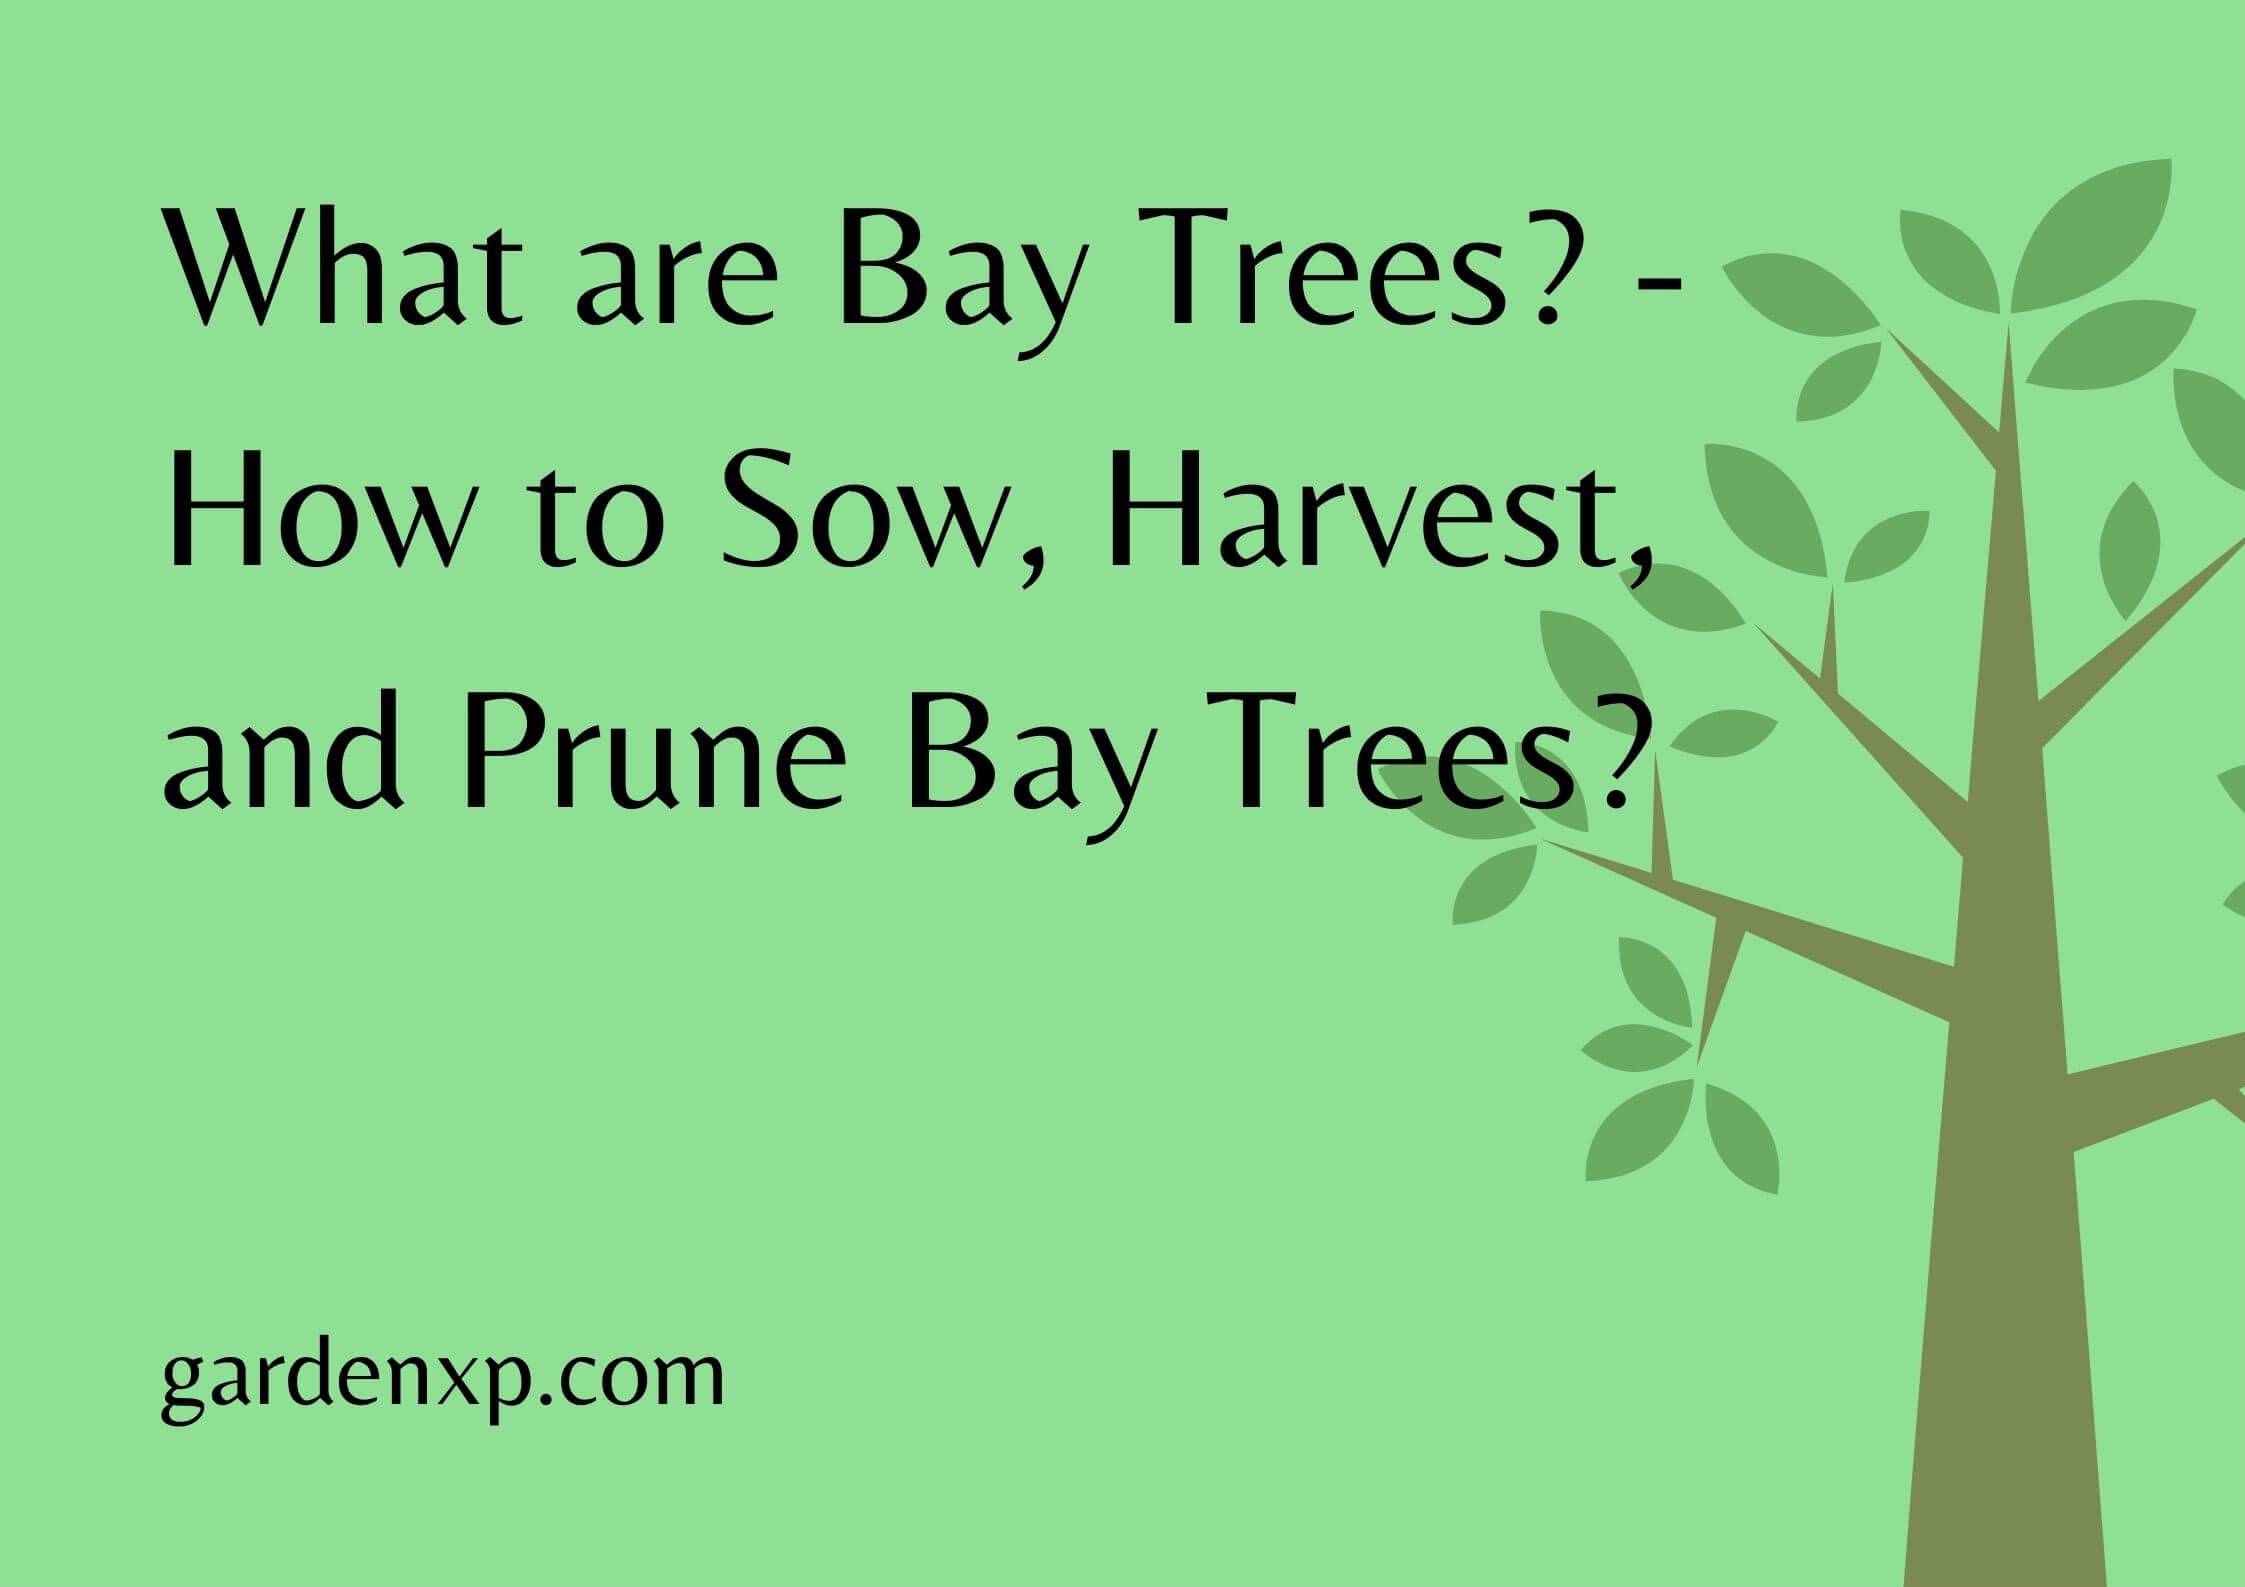 What are Bay Trees? - How to Sow Harvest and Prune Bay Trees?